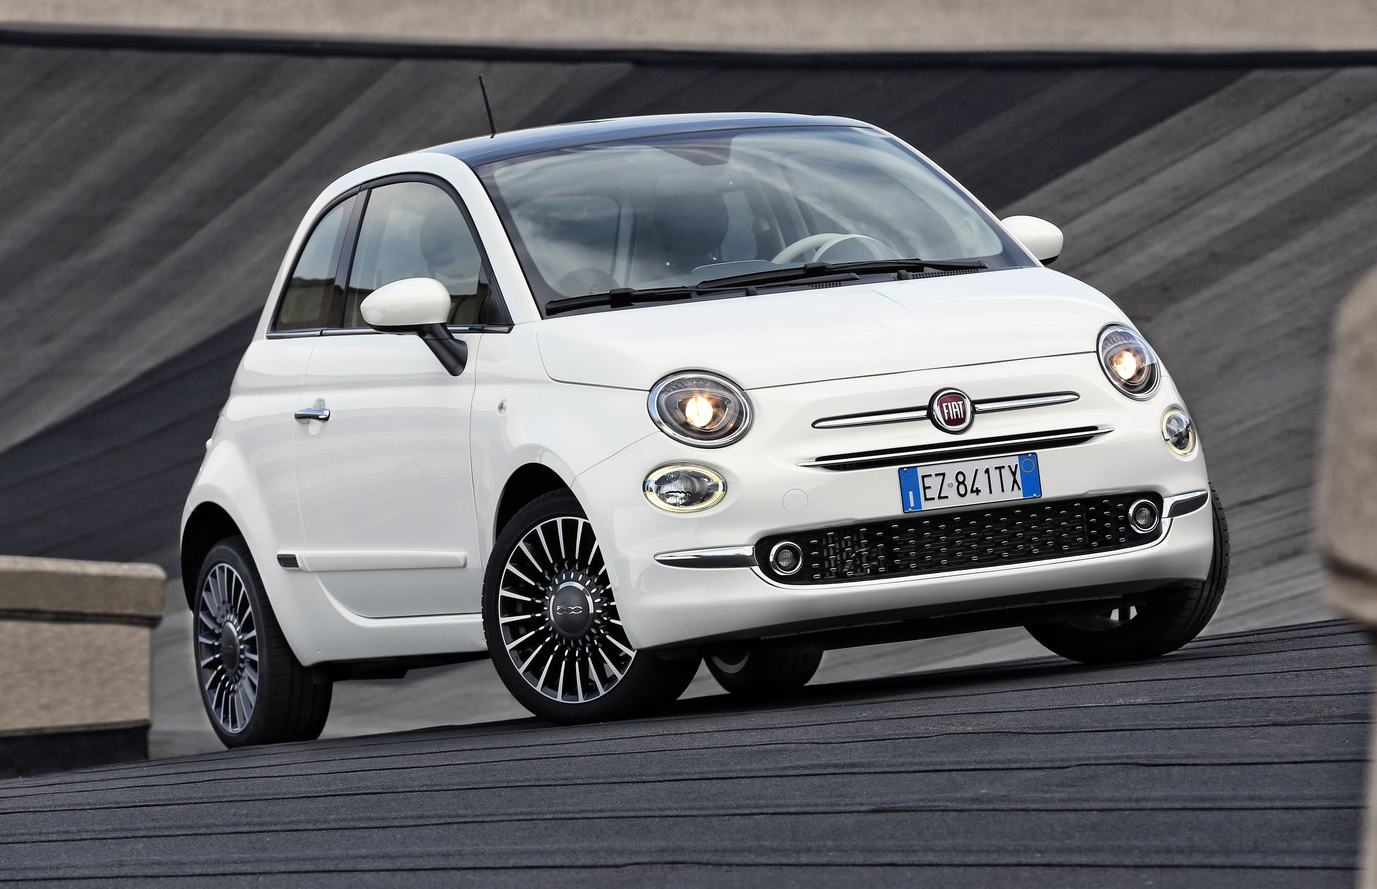 2016 Fiat 500 Revealed Refreshed looks, new infotainment